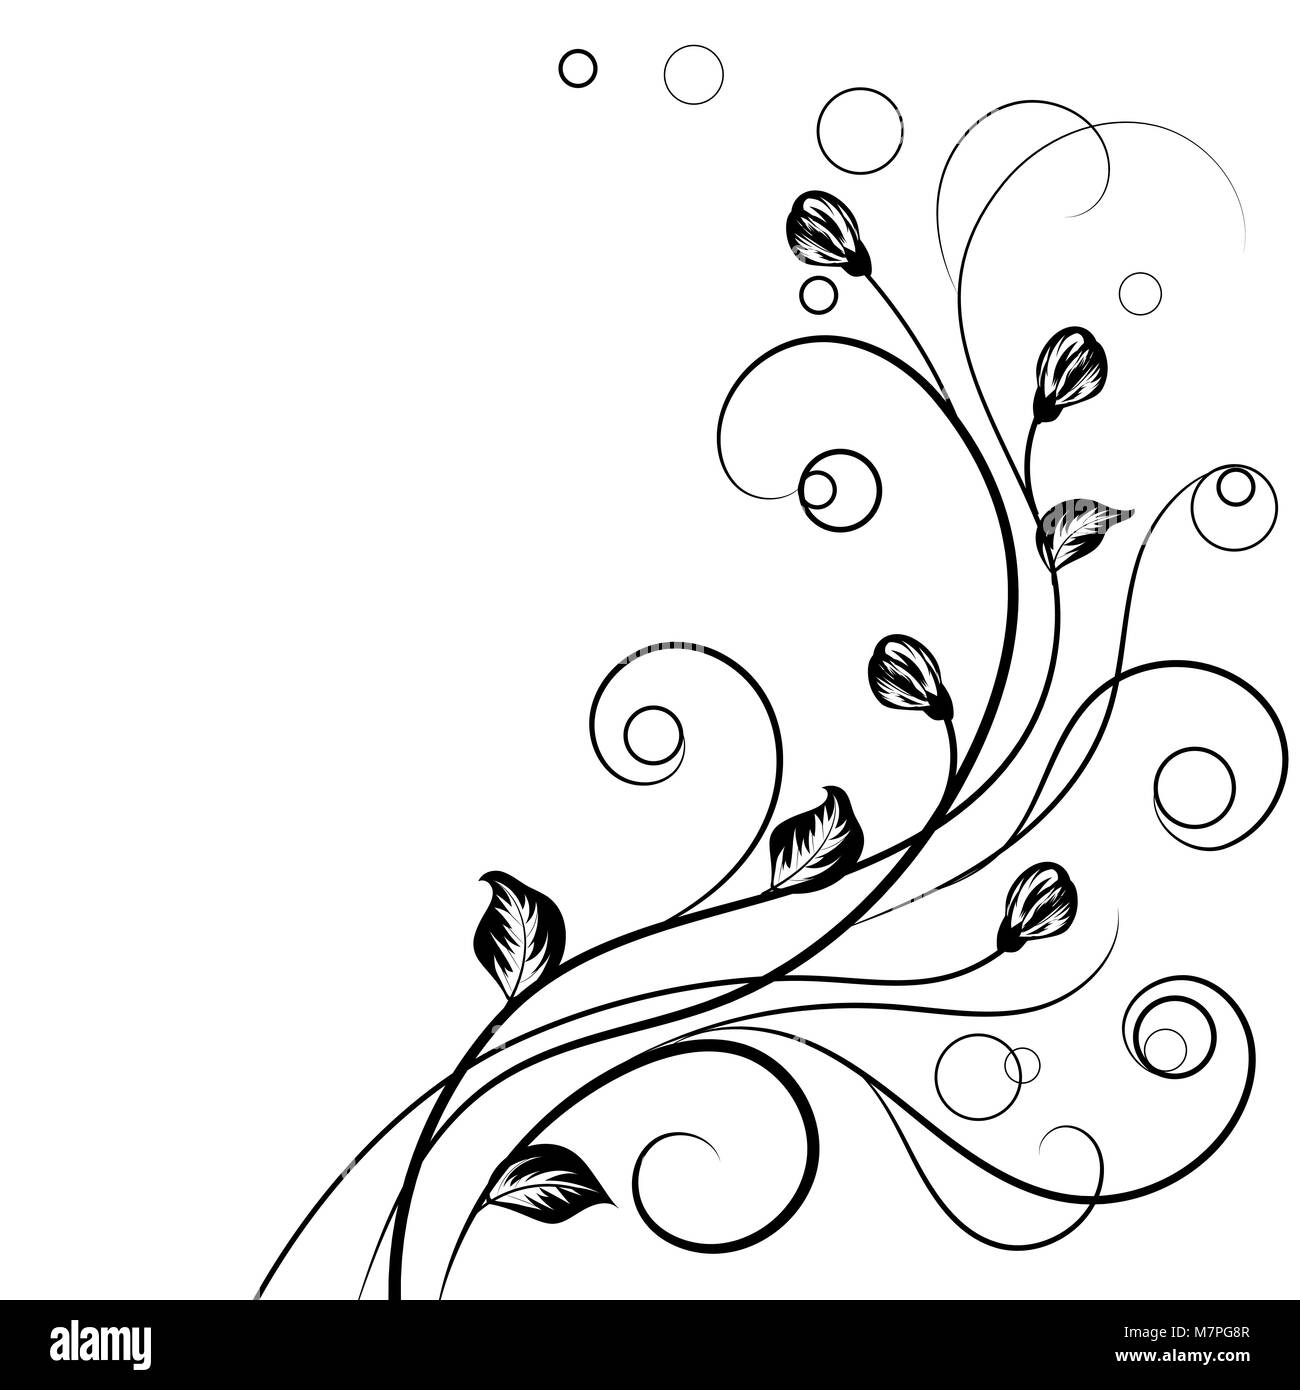 Floral background in black and white Stock Vector